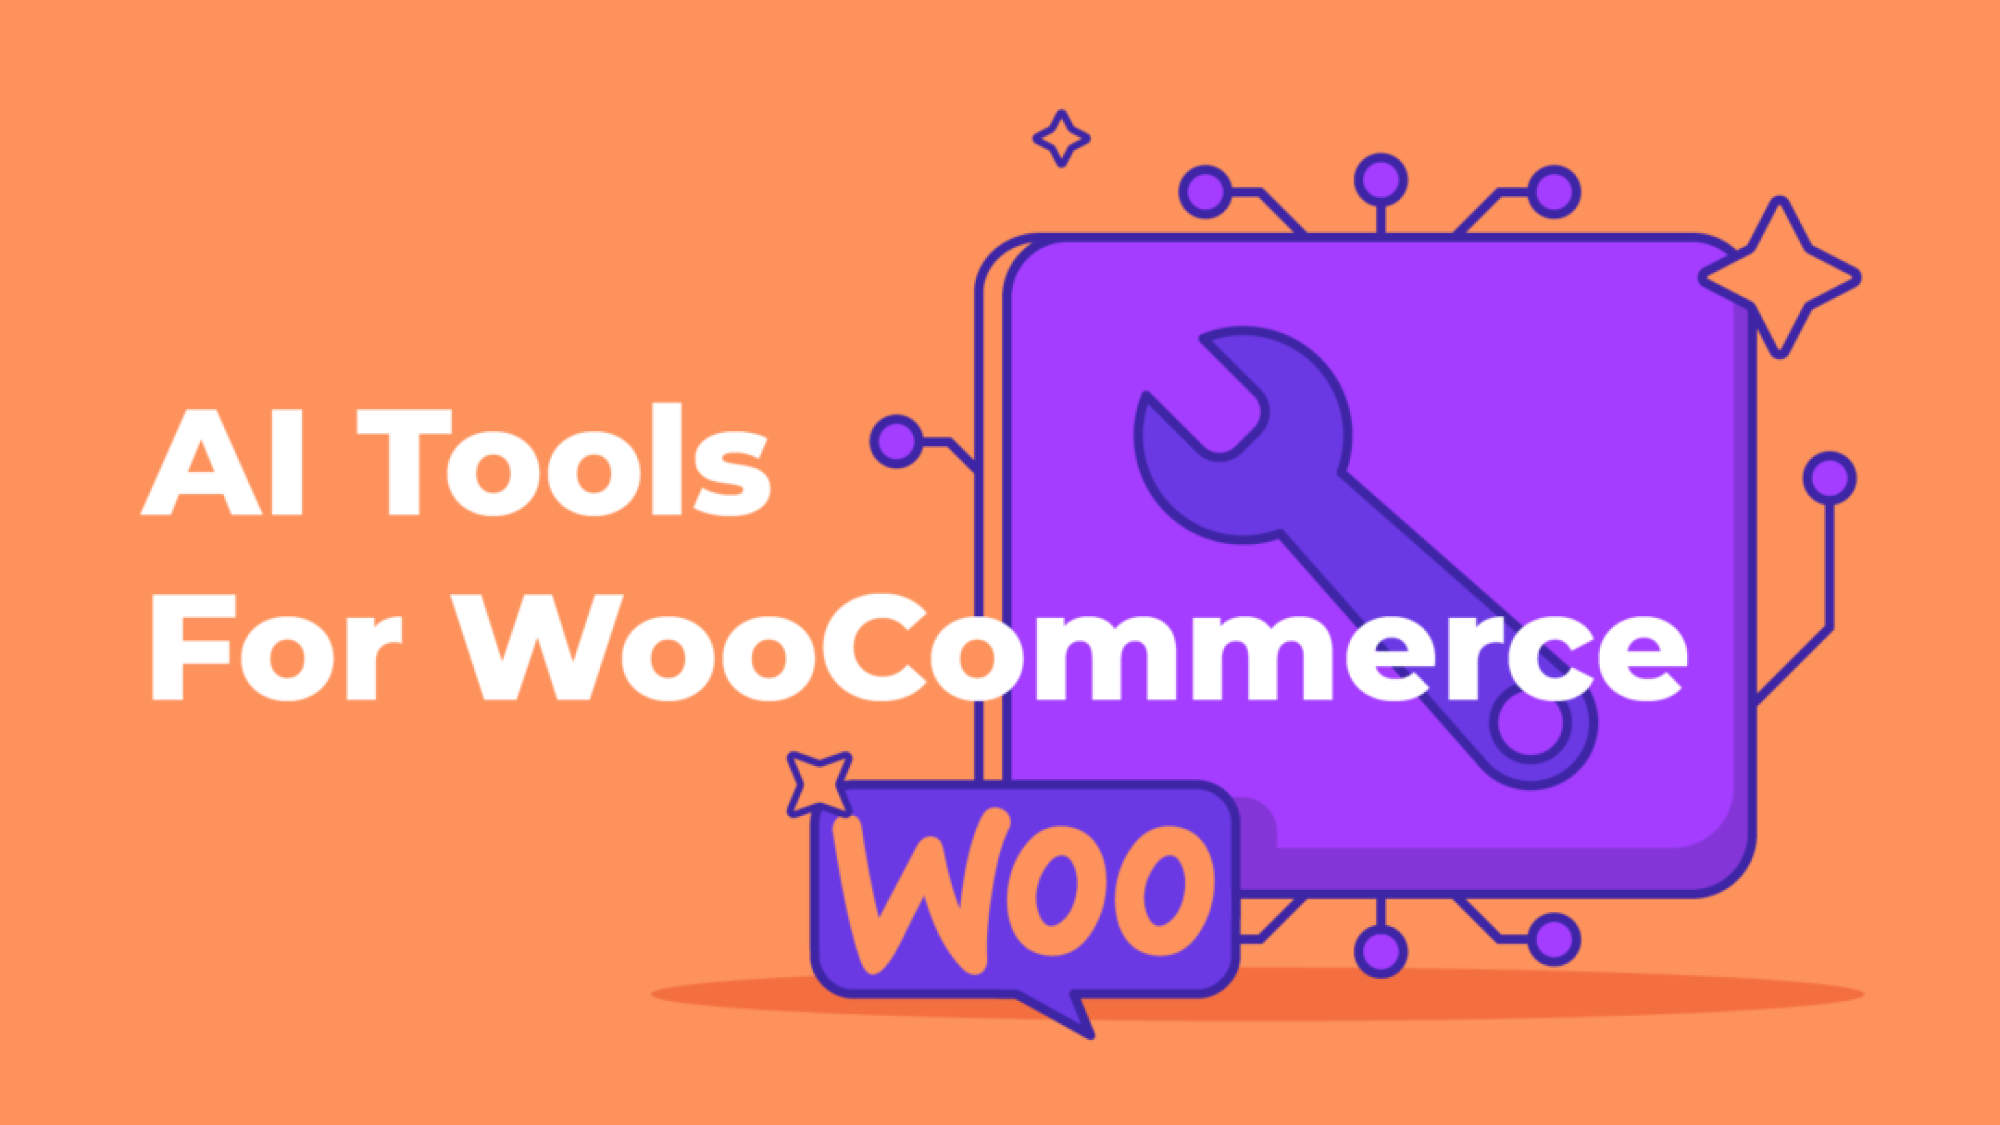 How much does a WooCommerce store cost